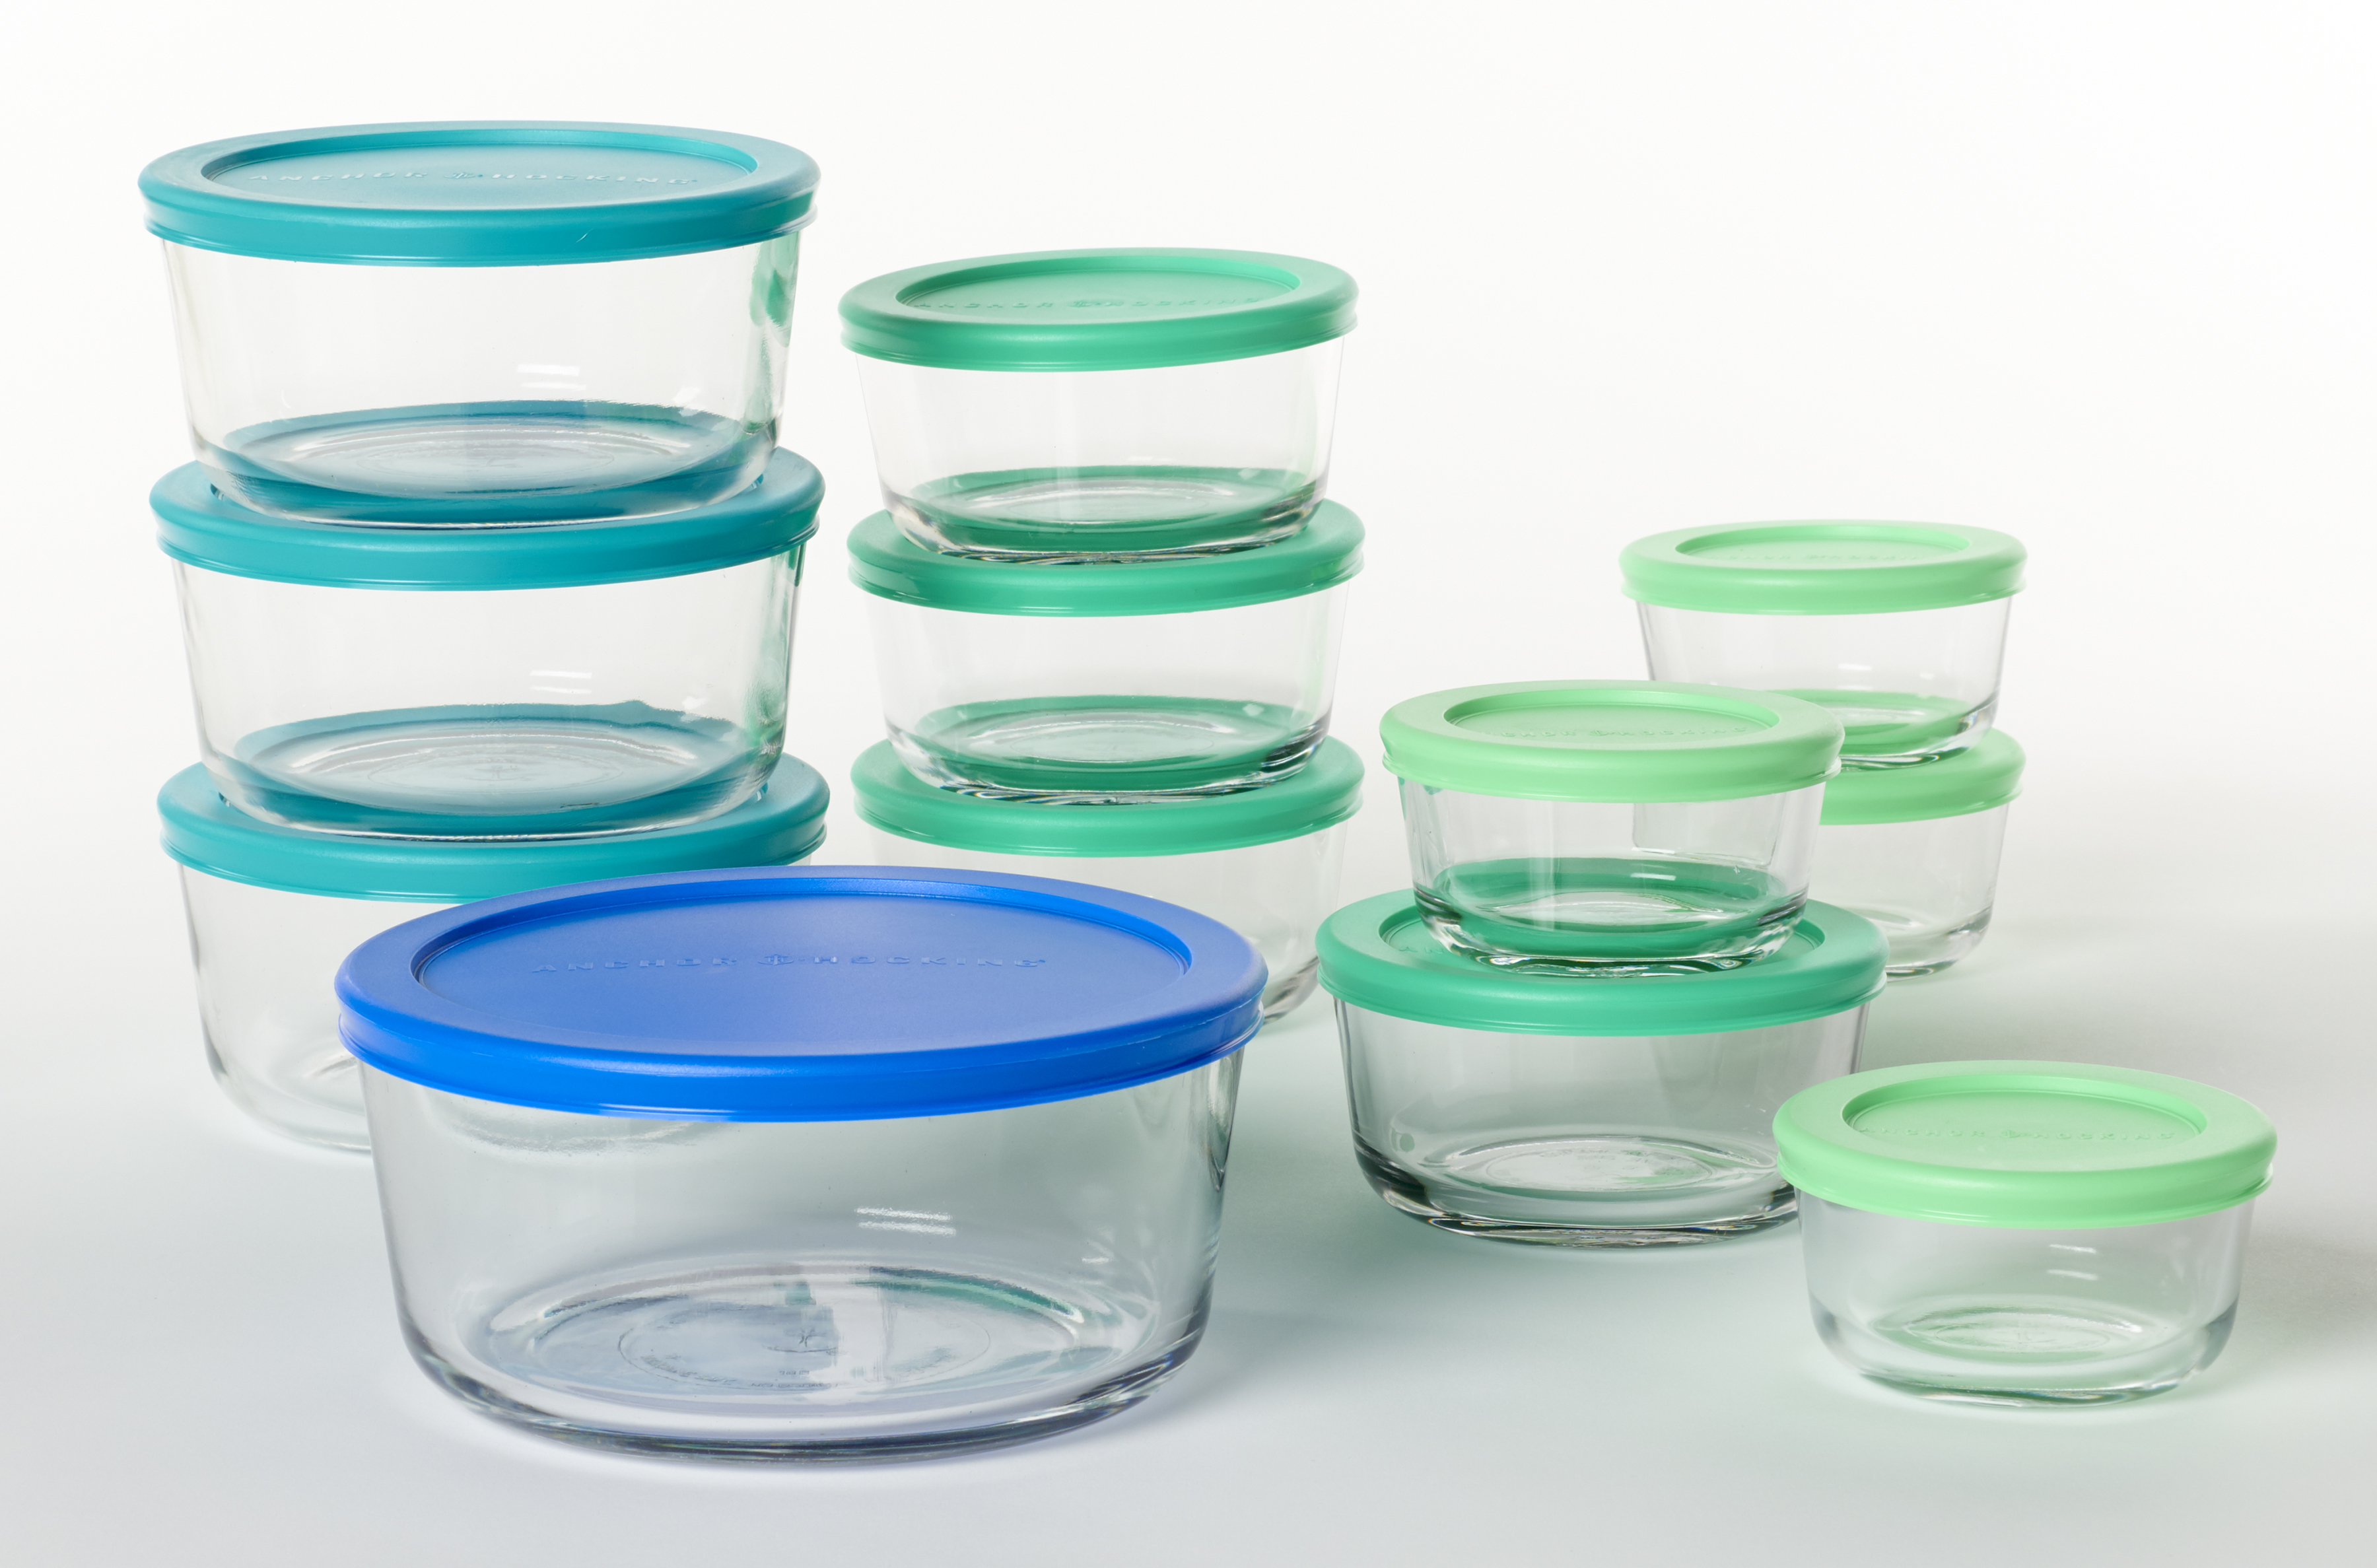 Anchor Hocking Clear Glass Food Storage Glass Set with SnugFit™ Multicolor Lids, 24 Piece Set - image 1 of 10